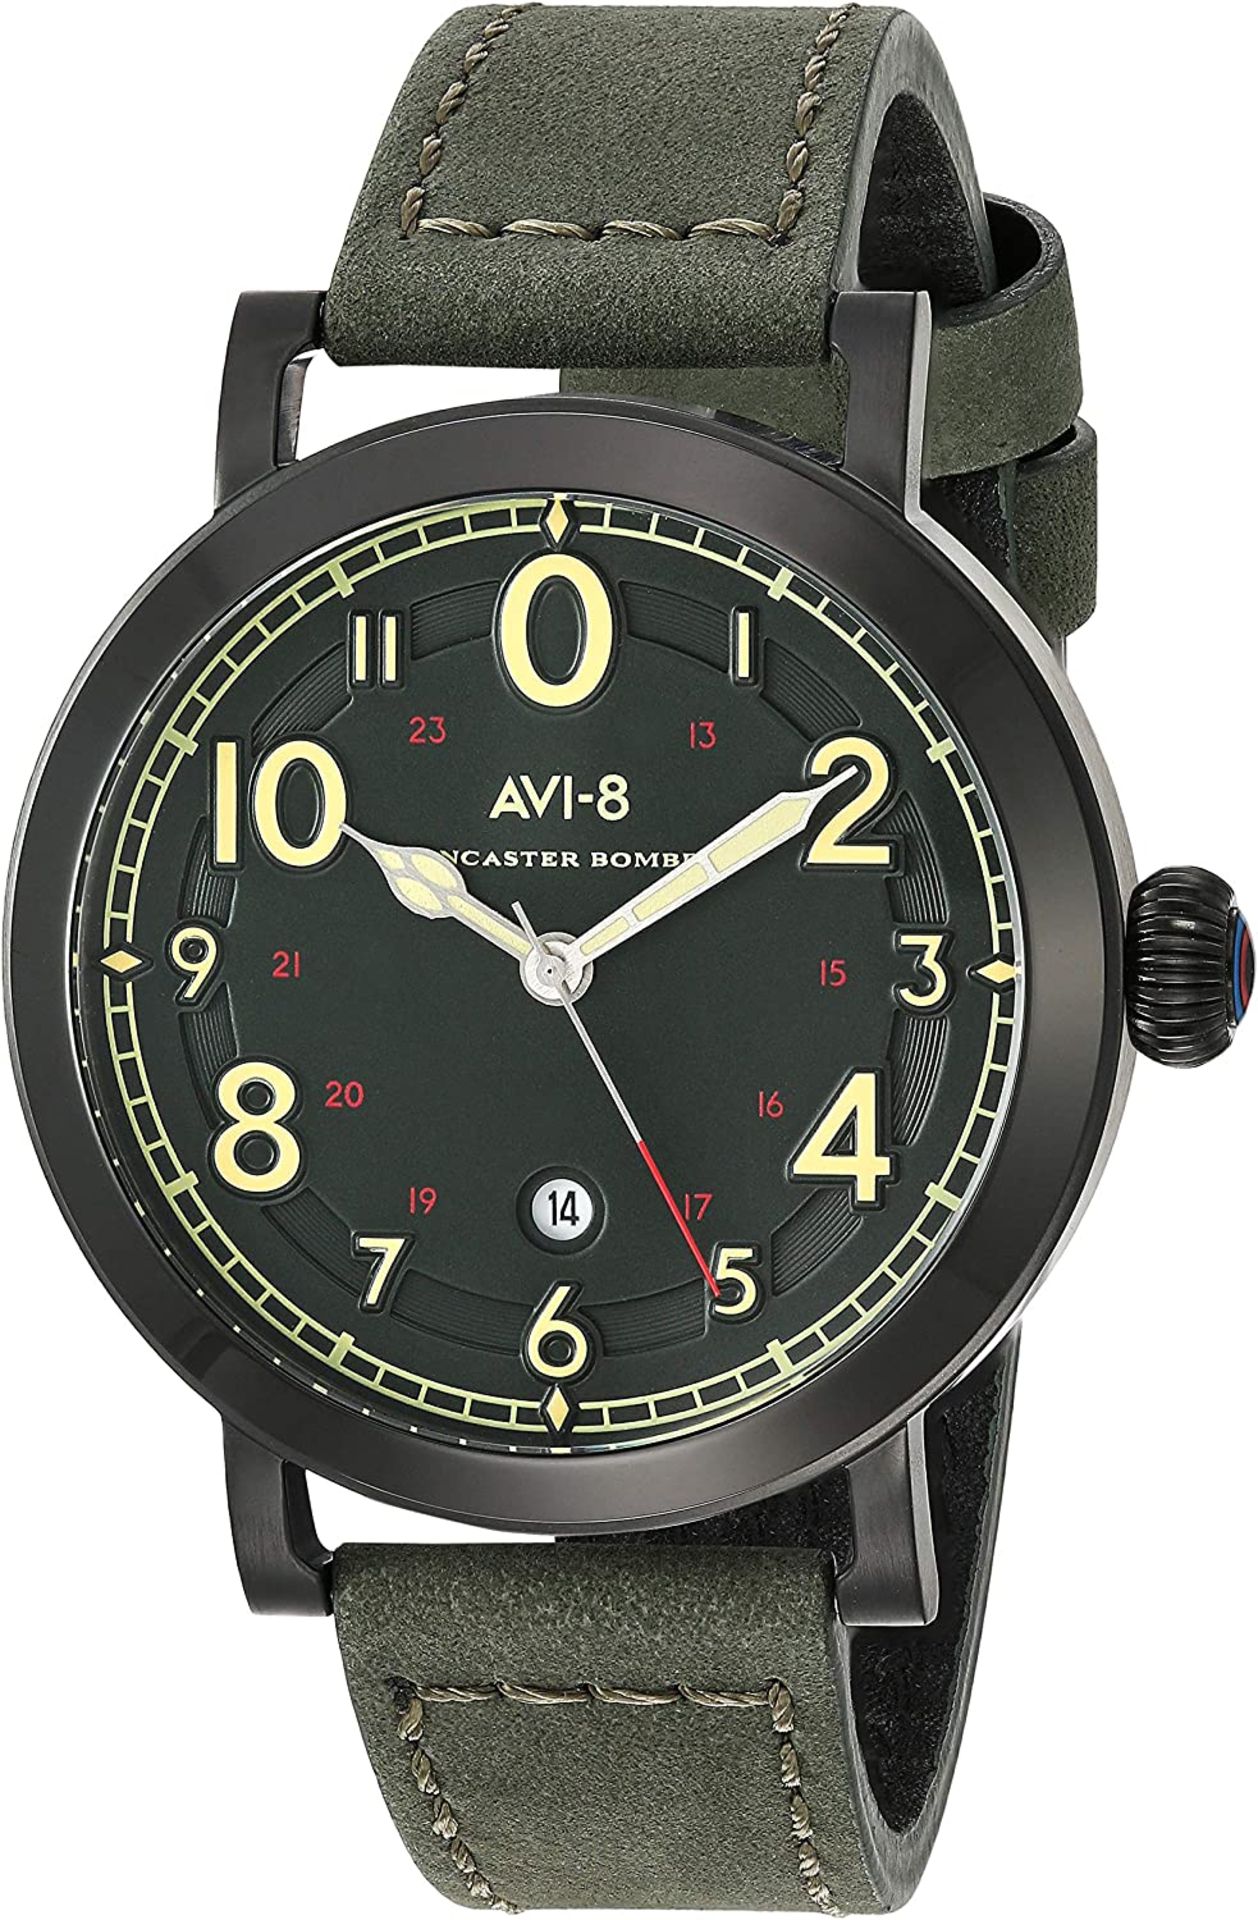 AVI-8 Men's Quartz Analog Watch, Green Leather Band, Steel Case - Ex Demo or Return from Private J..